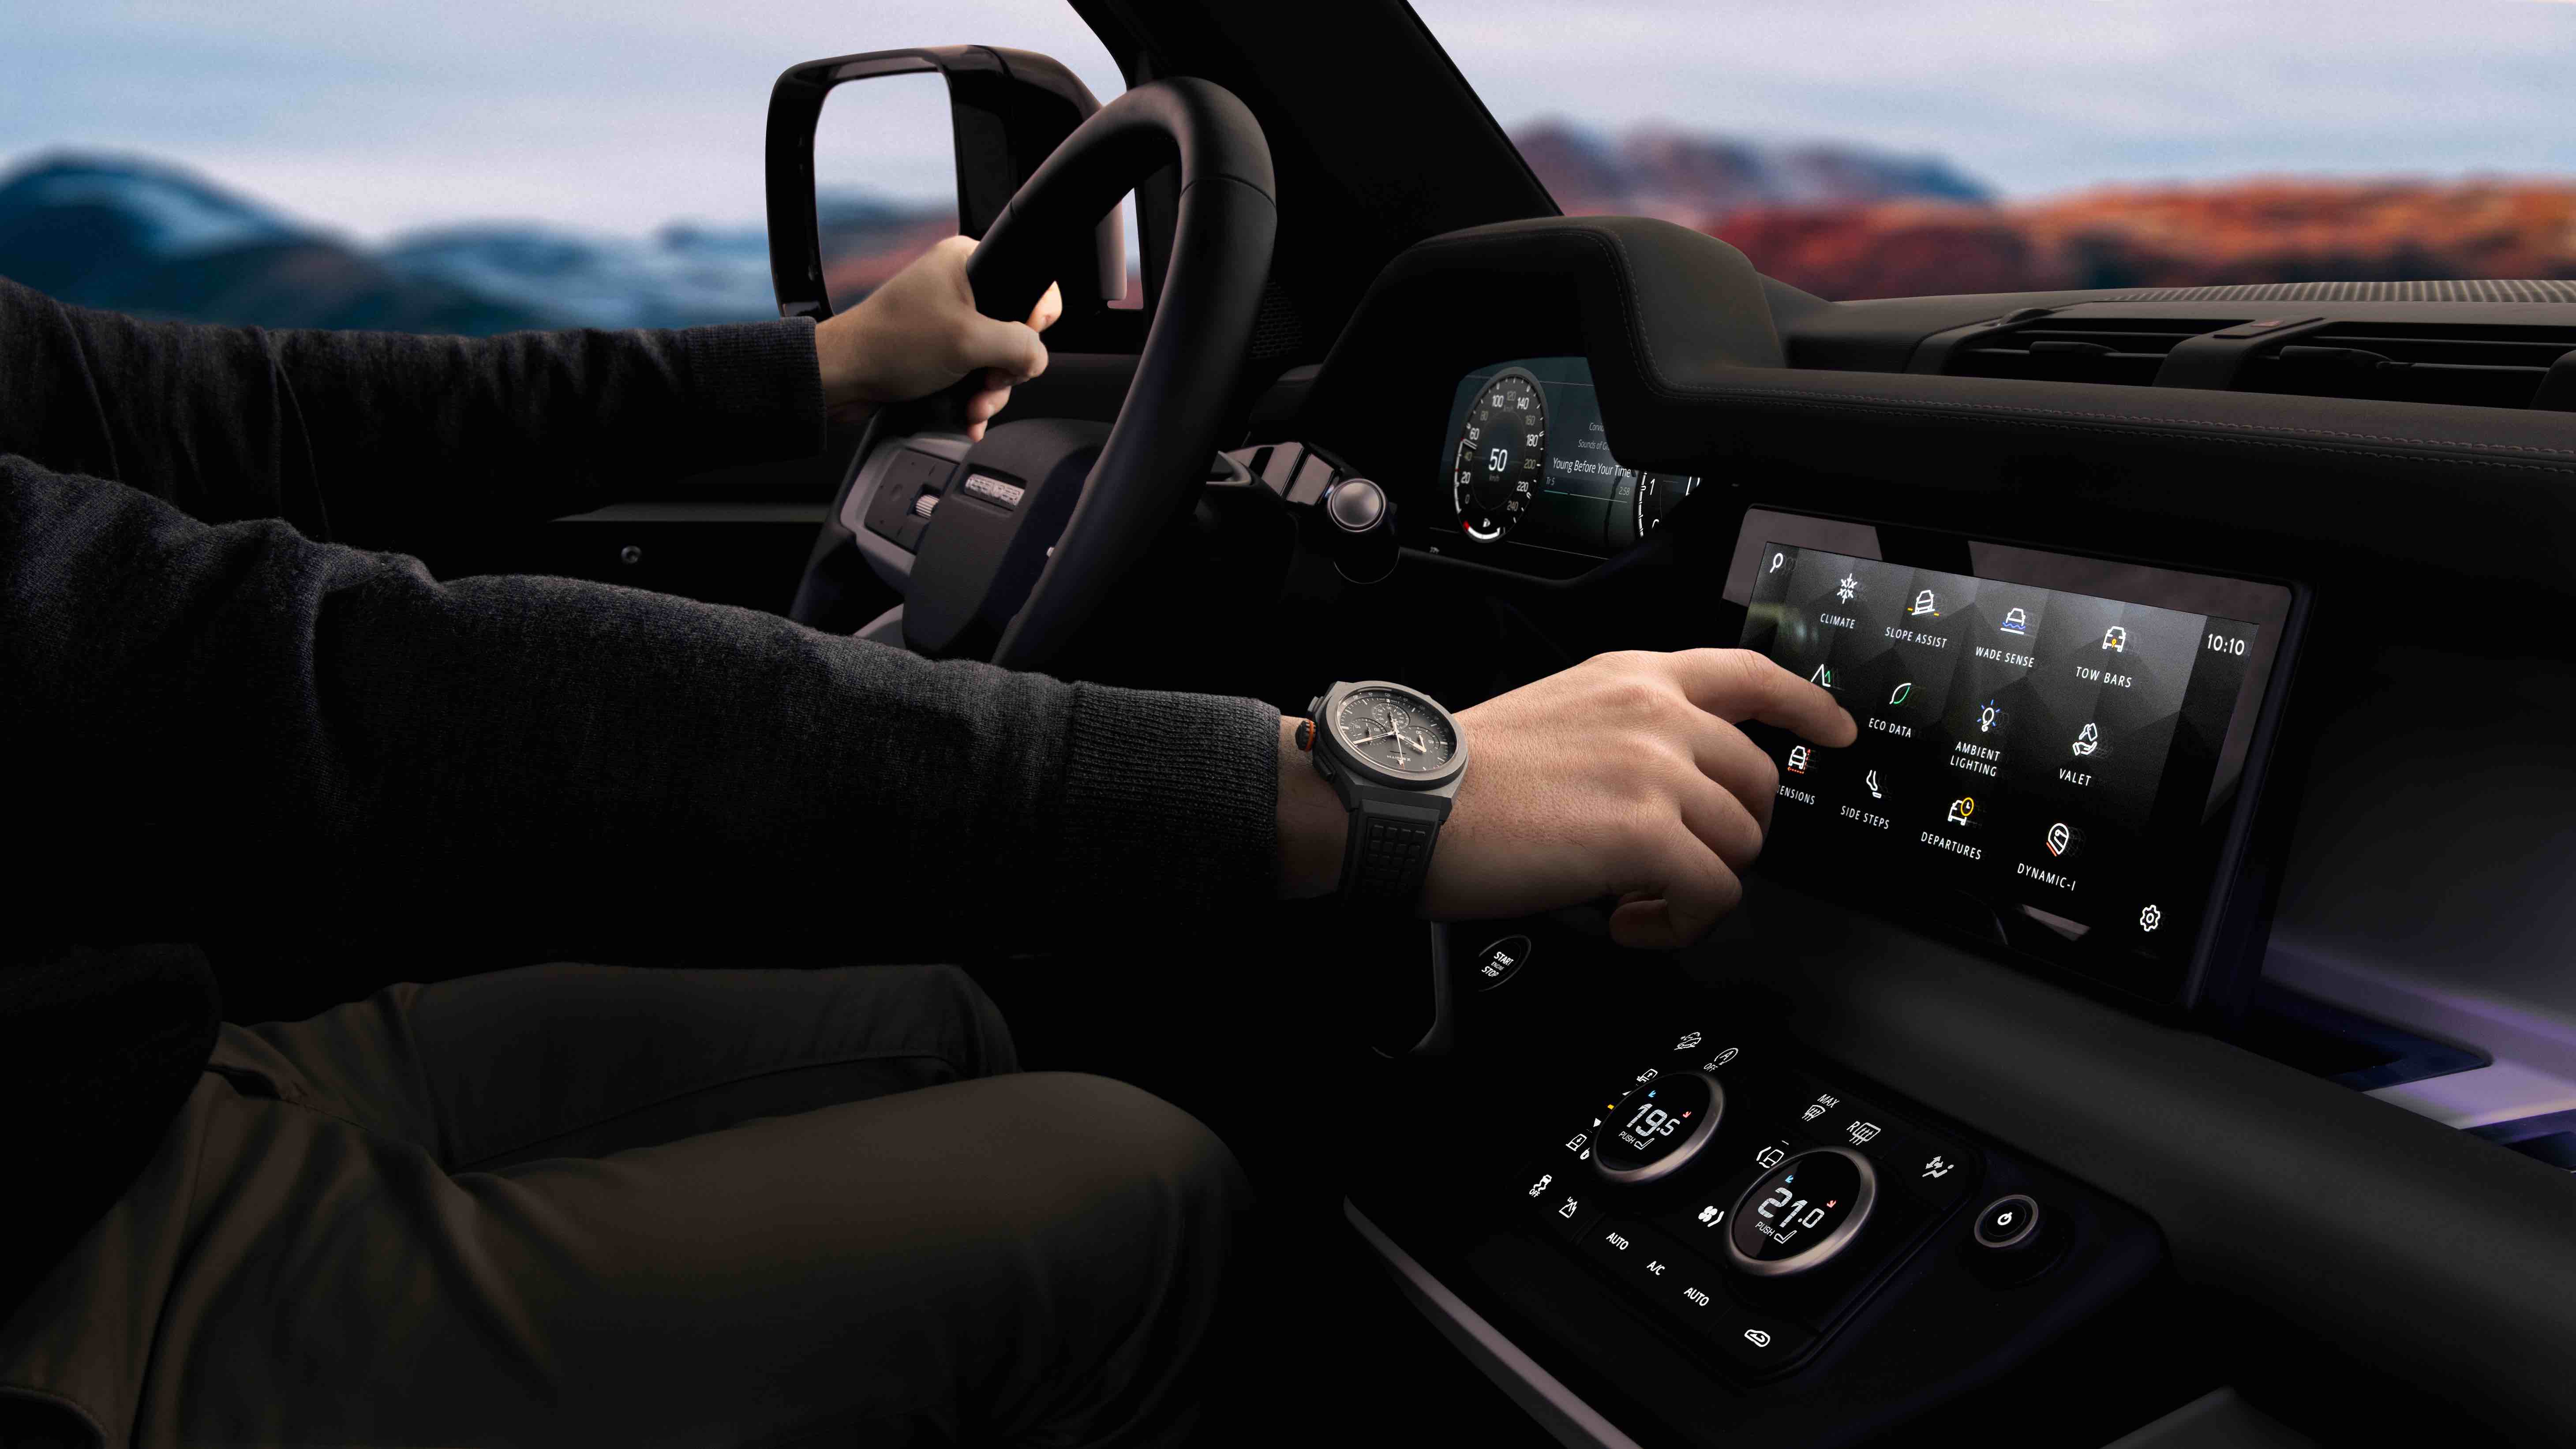 Watches Of Switzerland And Zenith Debut Land Rover Edition Watch To Celebrate New Partnership